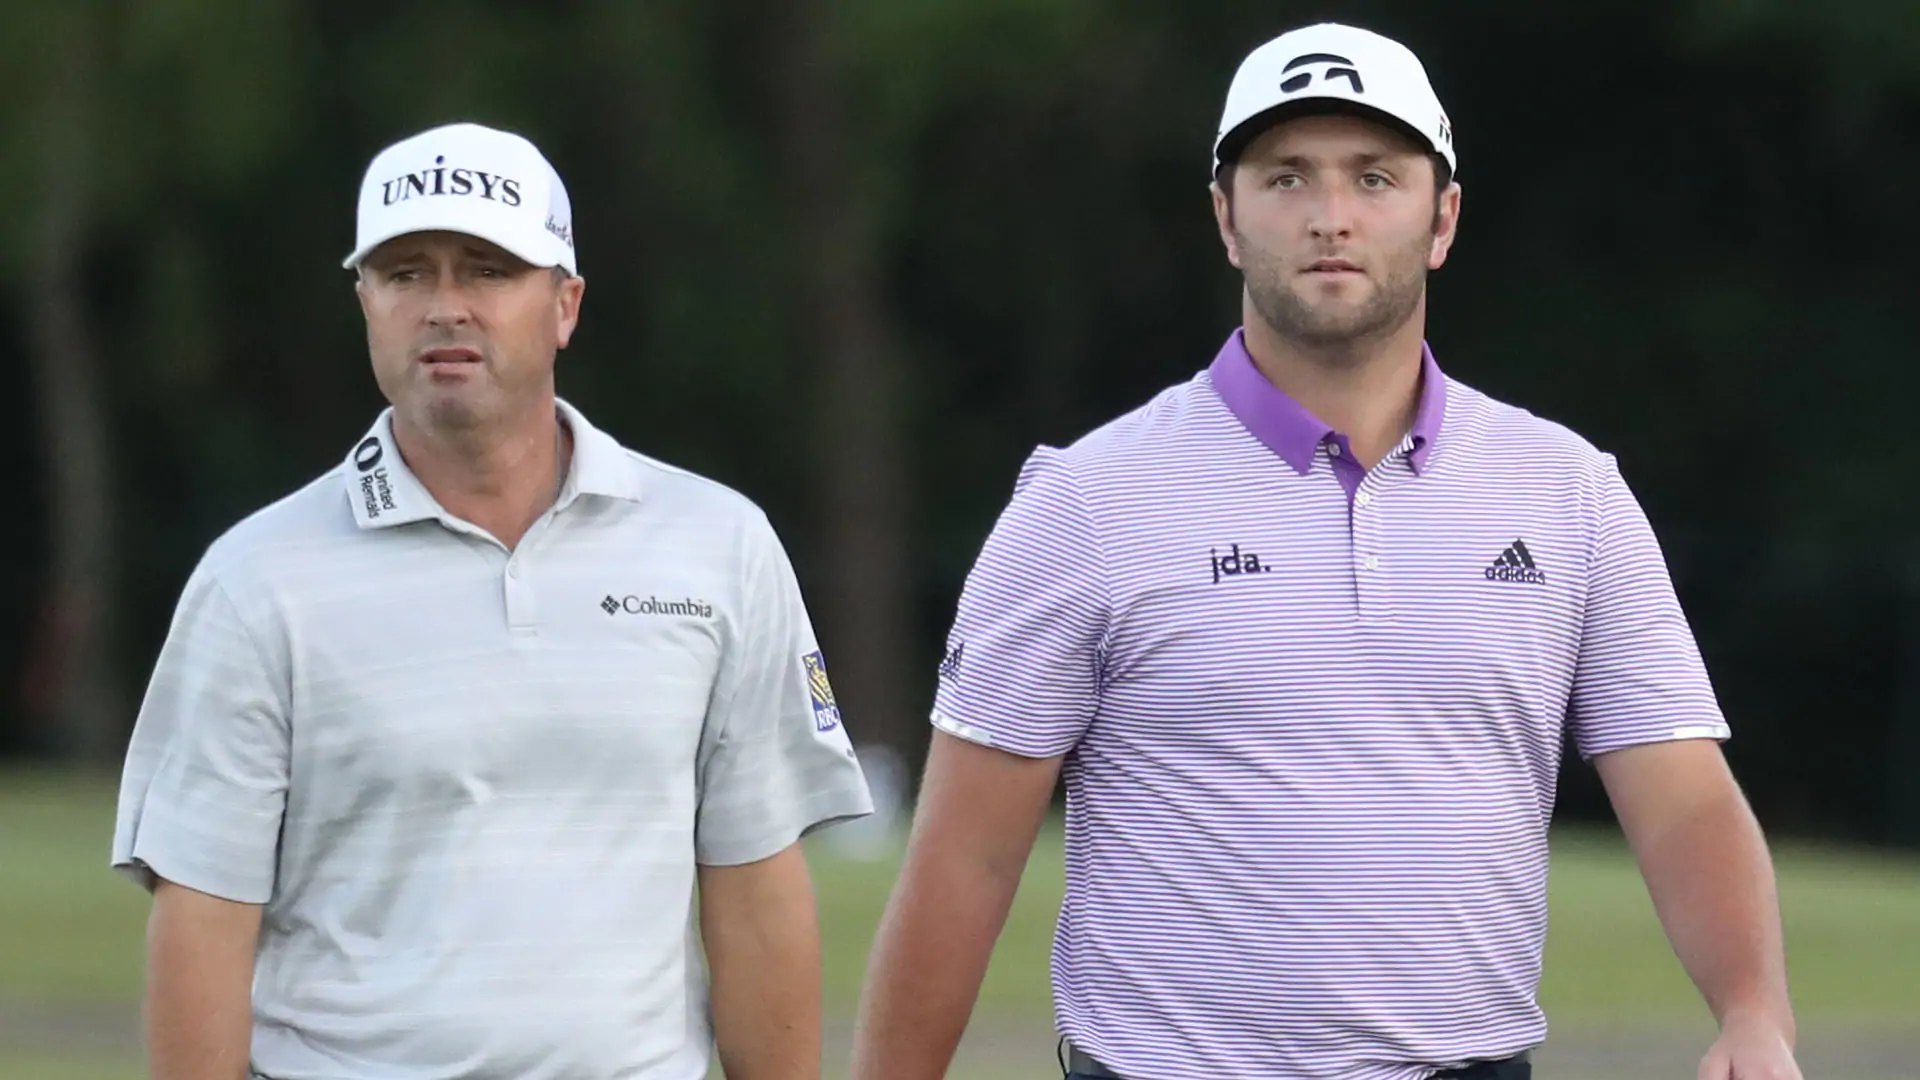 Rahm/Palmer (65) stars in foursomes to take Zurich Classic lead